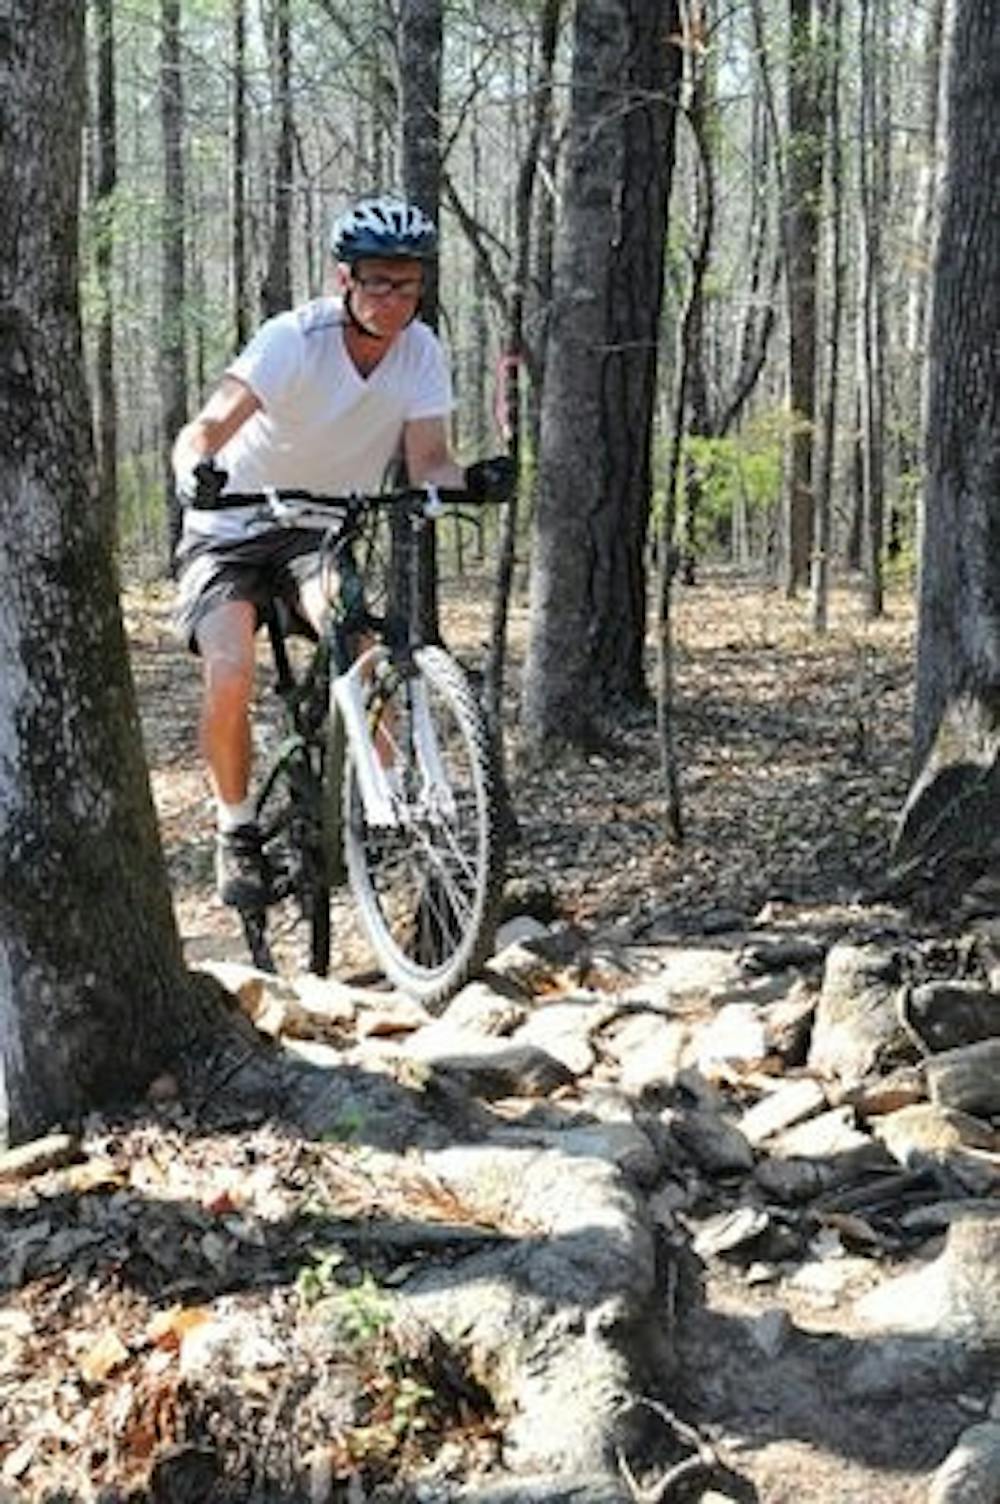 Brad Hooks rides his mountain bike up a rocky slope on the bike trail at Lake Wilmore near Ogletree Elementary School. (Christen Harned / Assistant Photo Editor)